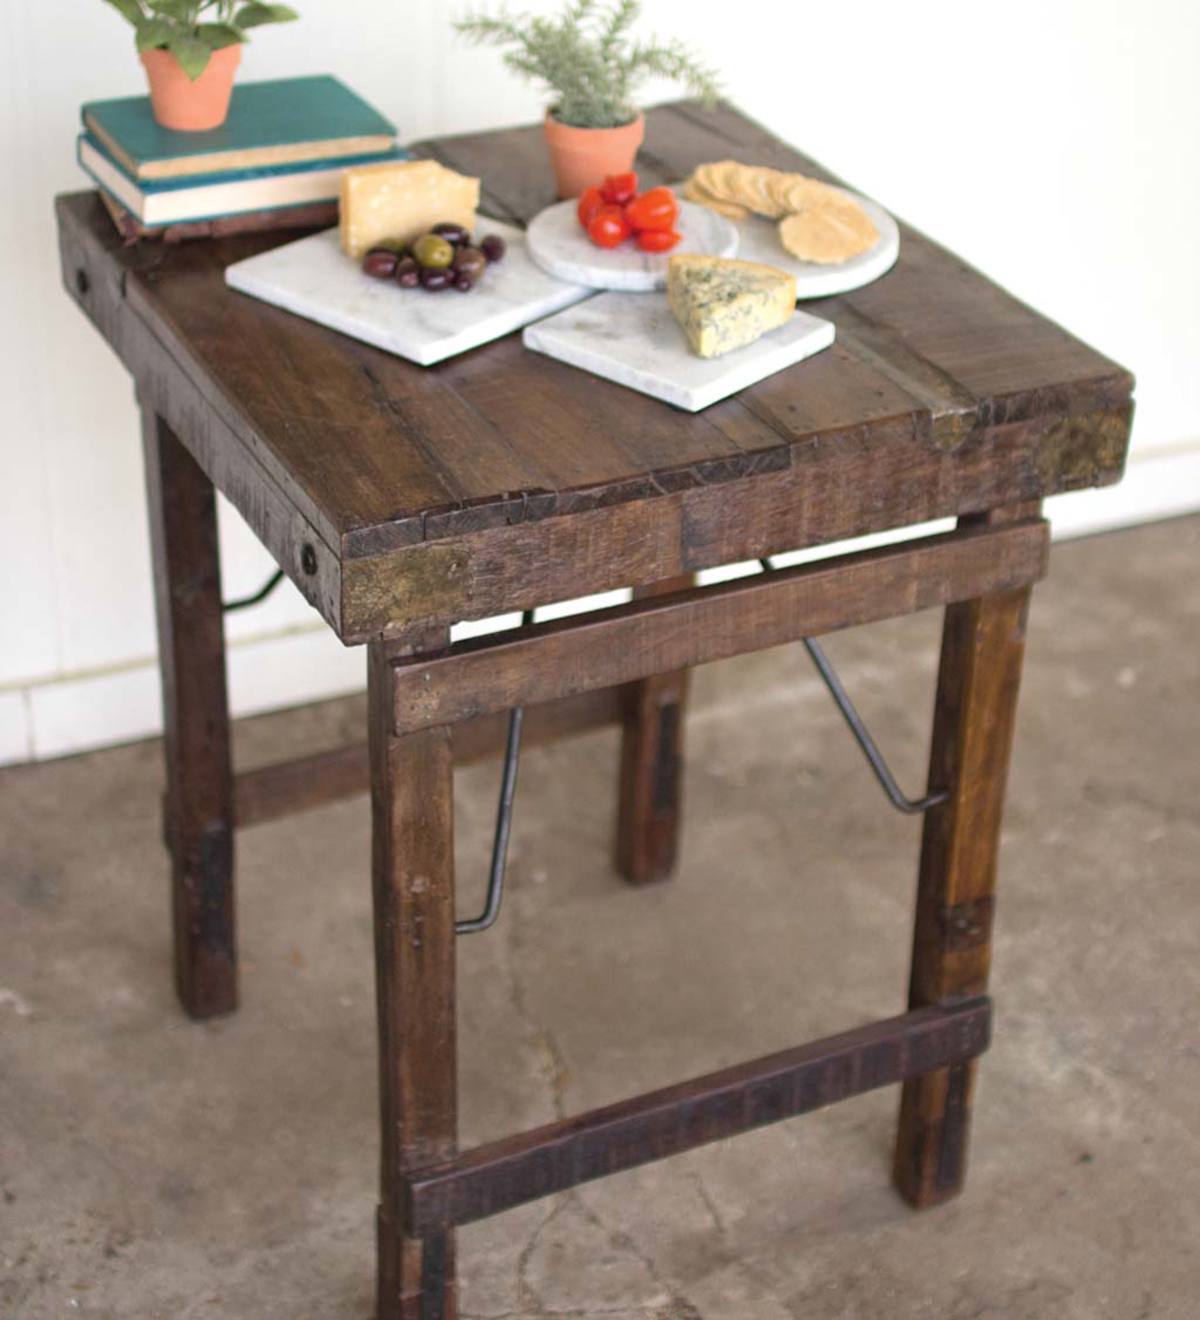 Reclaimed Antique Wooden Side Table with Folding Legs